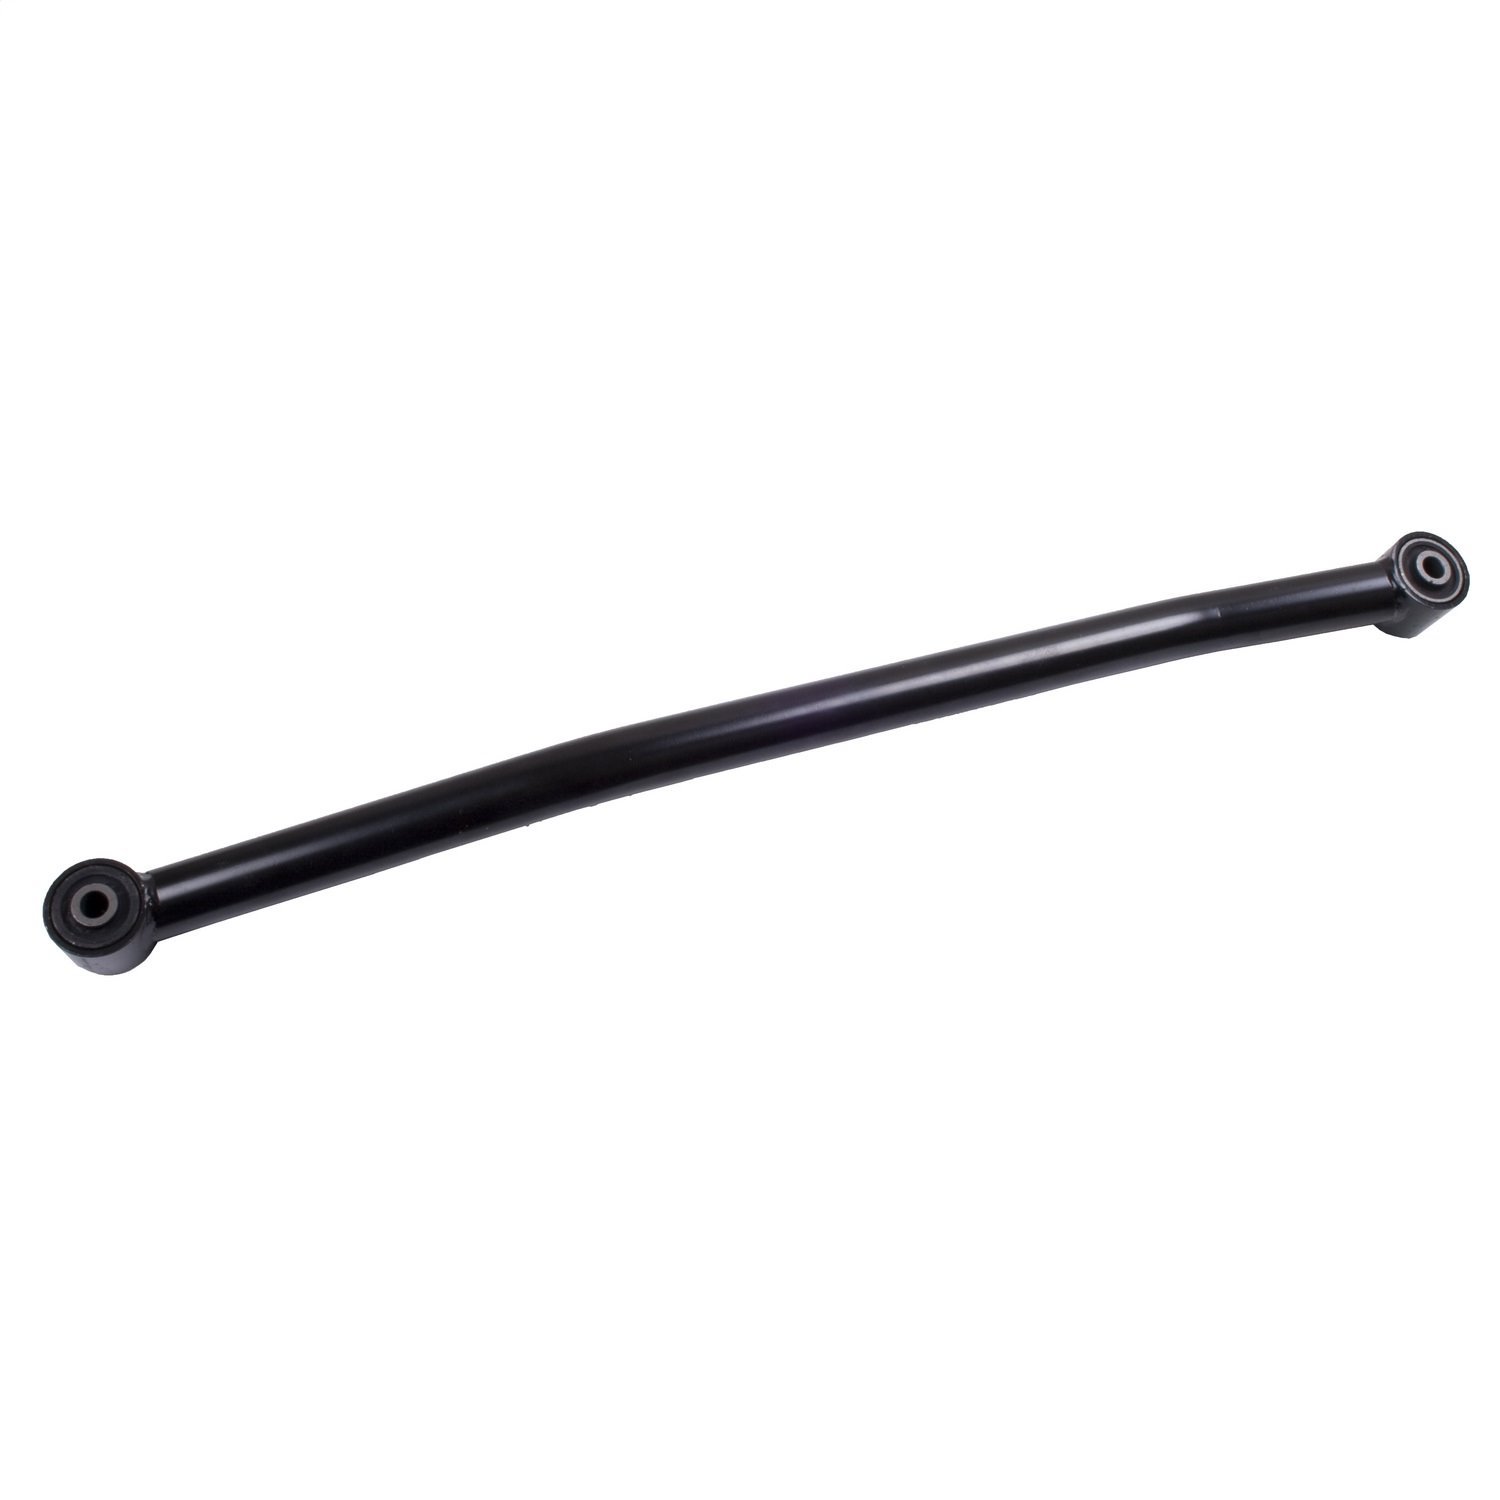 Replacement front track bar from Omix-ADA, Fits 87-95 Jeep Wrangler YJIt is non-adjustable.